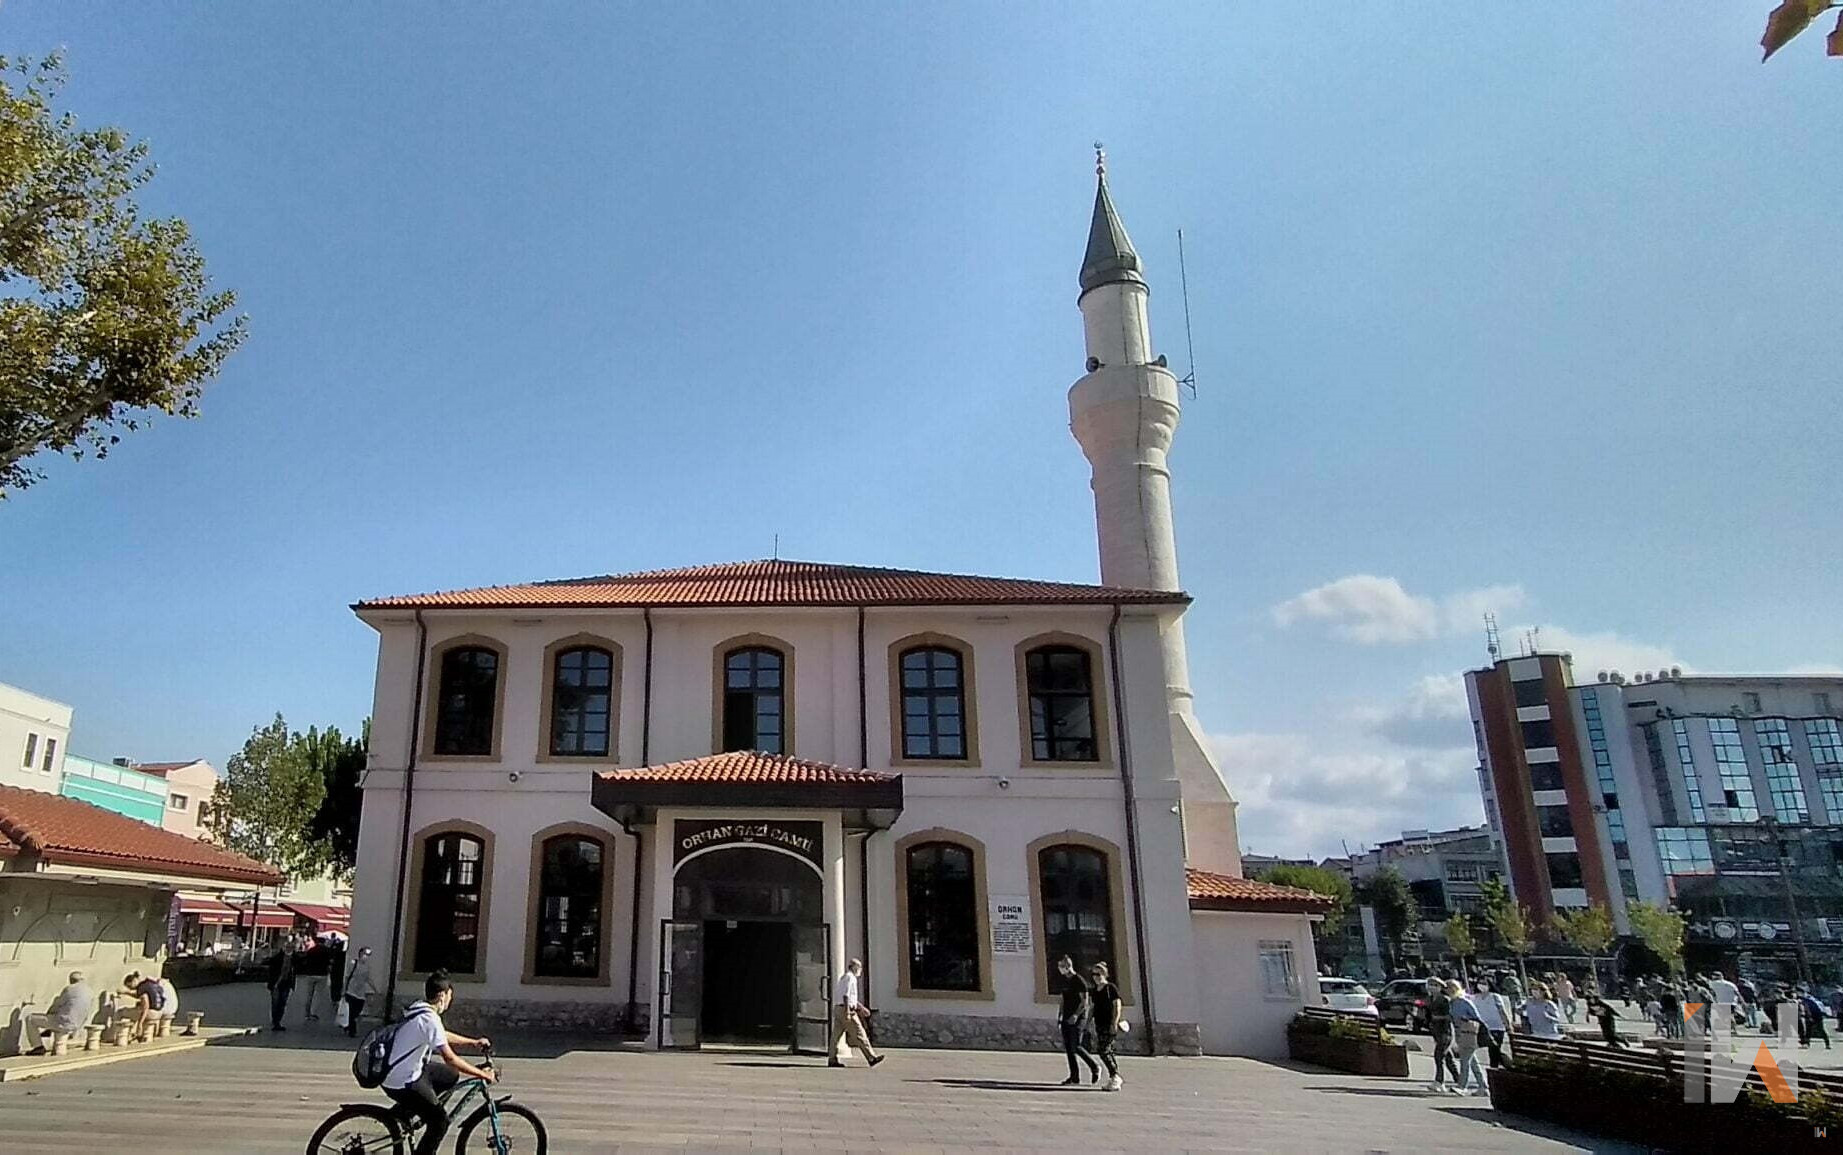 <h3>ORHAN GAZI MOSQUE </h3>Orhan Gazi Mosque, built in honor of Ottoman Sultan Orhan Bey during his reign, stands as a significant work of Ottoman architecture. The mosque was reconstructed as a larger structure between the years 1316-1318. However, over time, the Orhan Gazi Mosque suffered damages and underwent meticulous reconstruction from 1893 to 1894. This restoration process transformed the mosque into the magnificent and historical structure visible today. Orhan Gazi Mosque represents an important part of the rich cultural heritage of the Ottoman Empire.